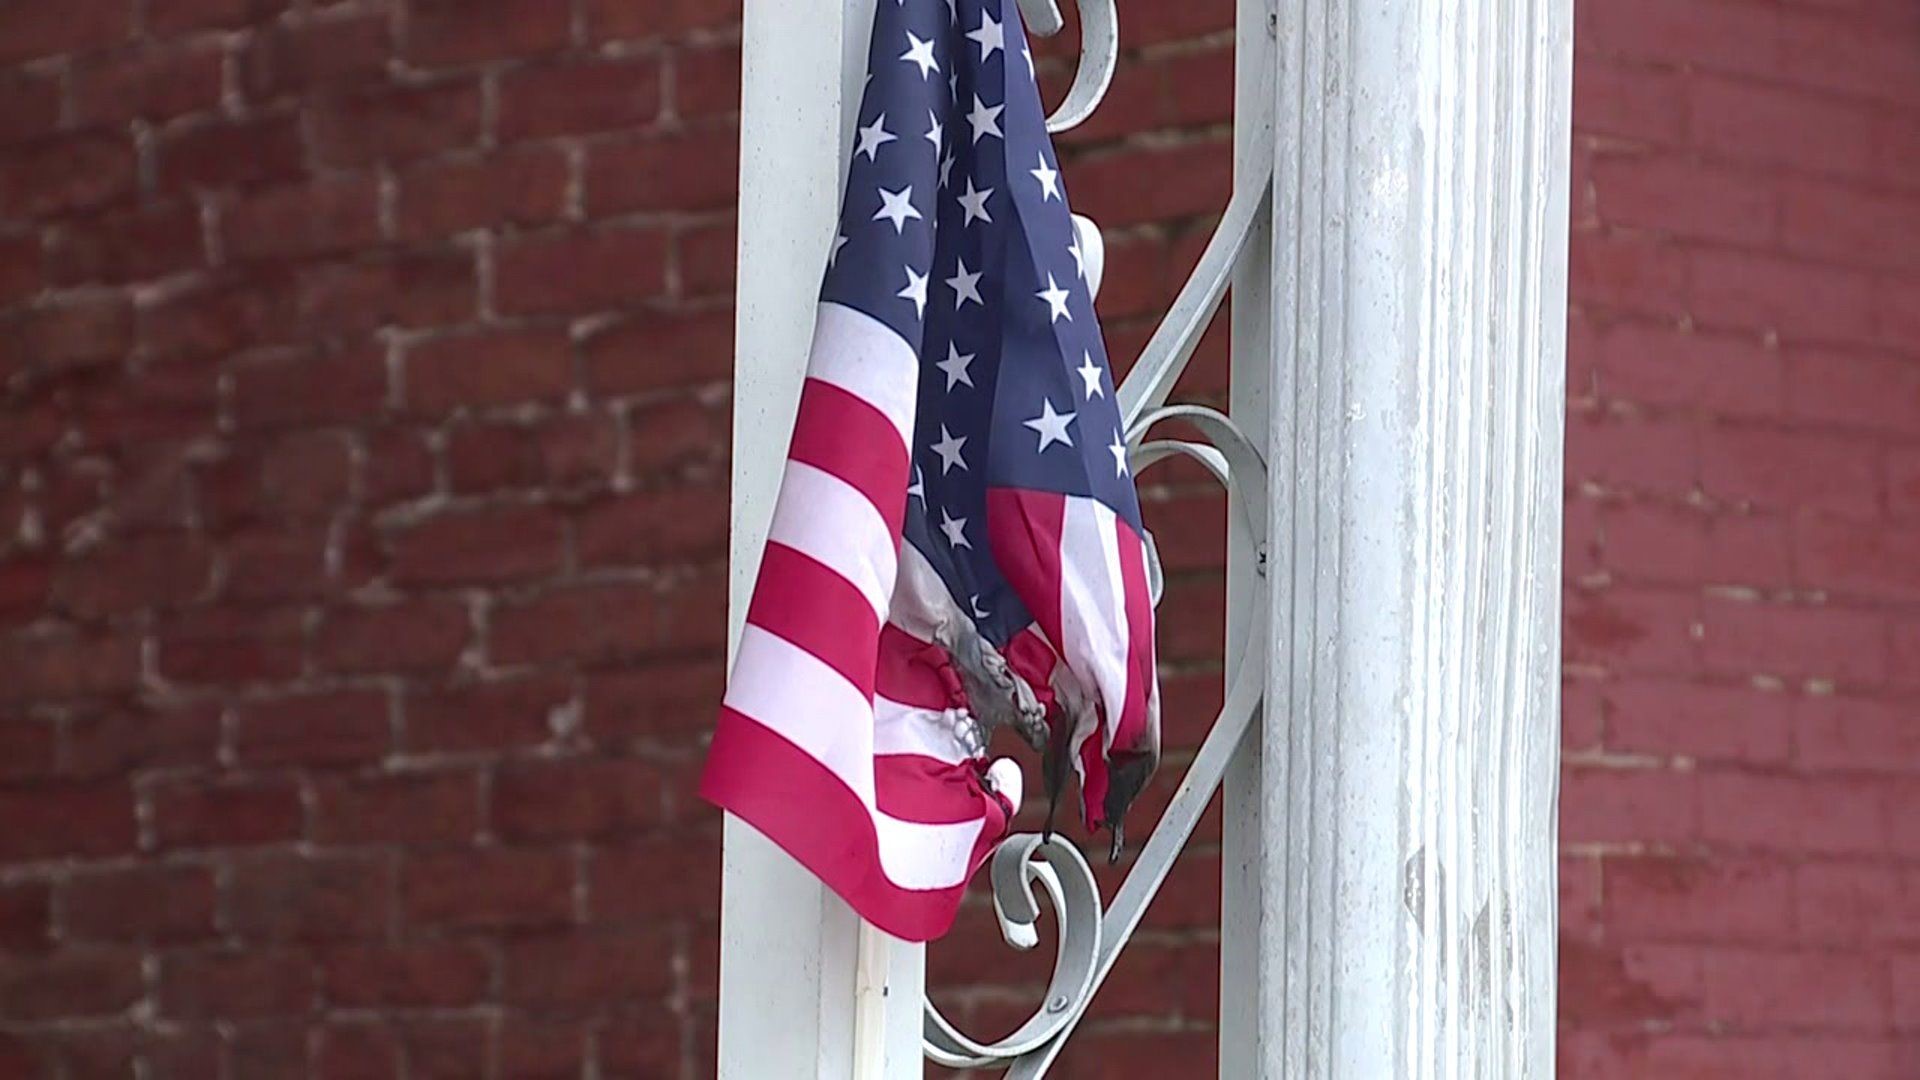 Police seek to identify man who burned flags on porch of Lebanon home